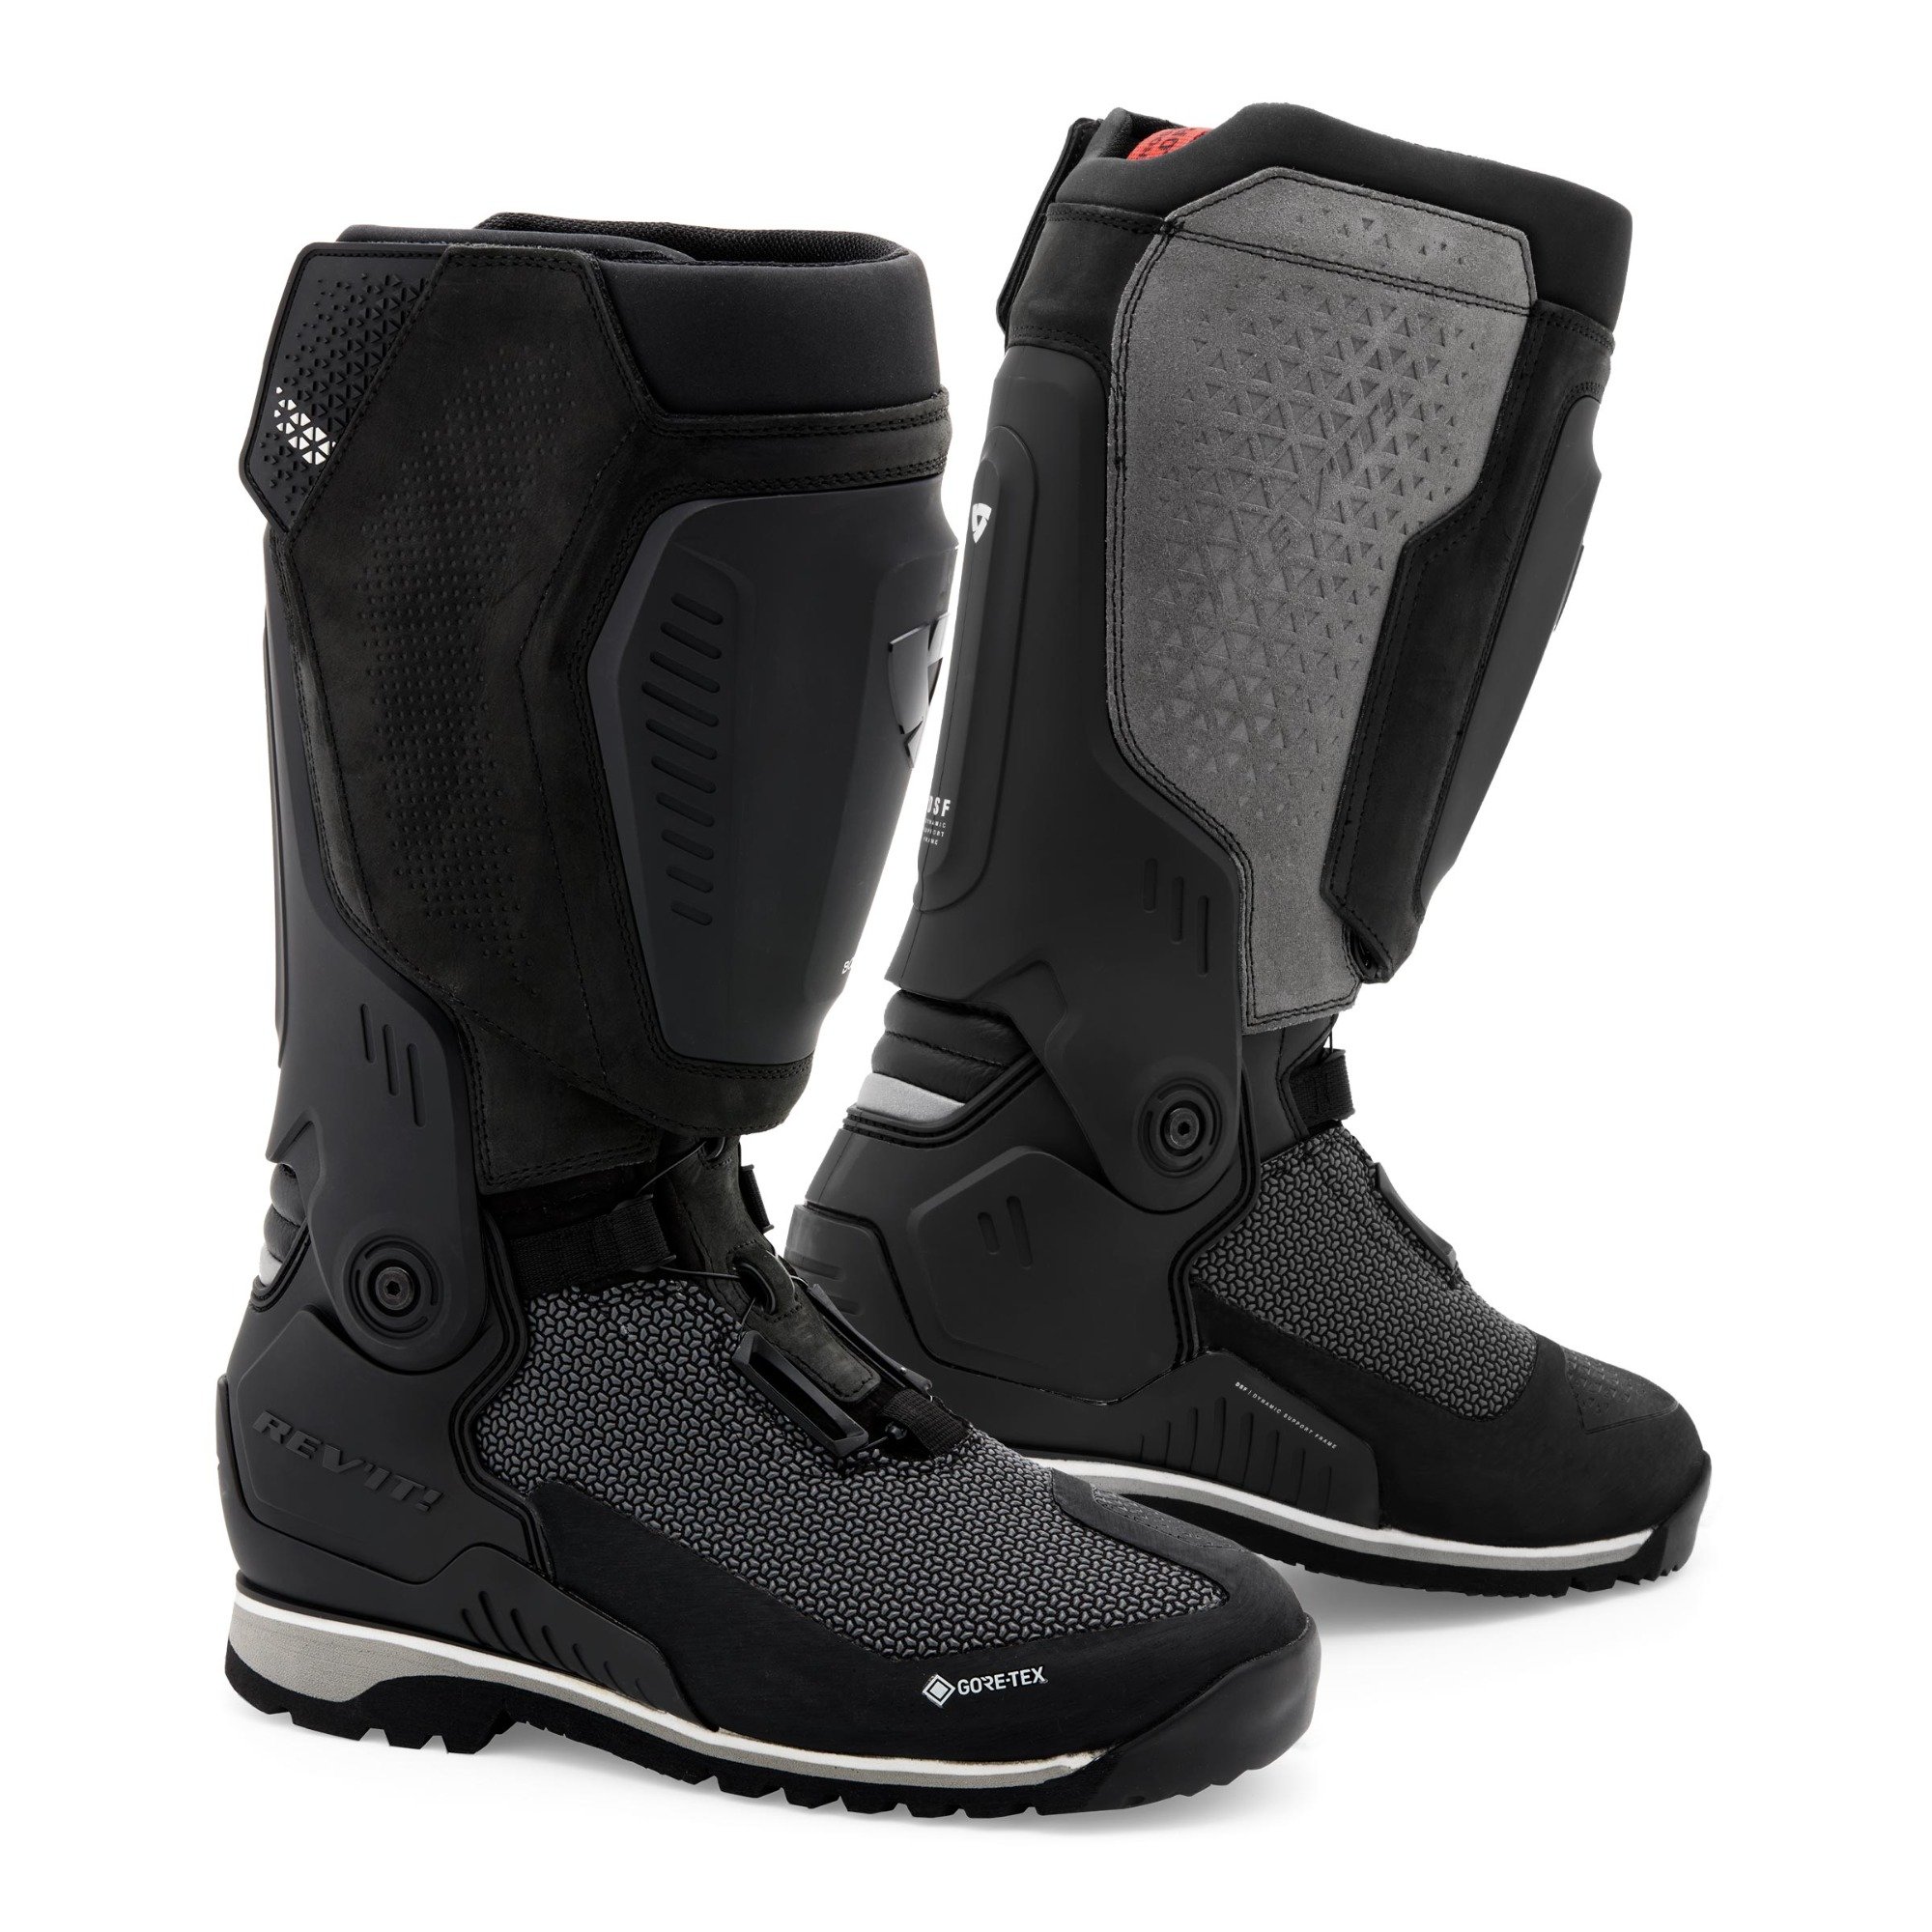 Image of REV'IT! Expedition GTX Boots Black Grey Size 40 ID 8700001327879